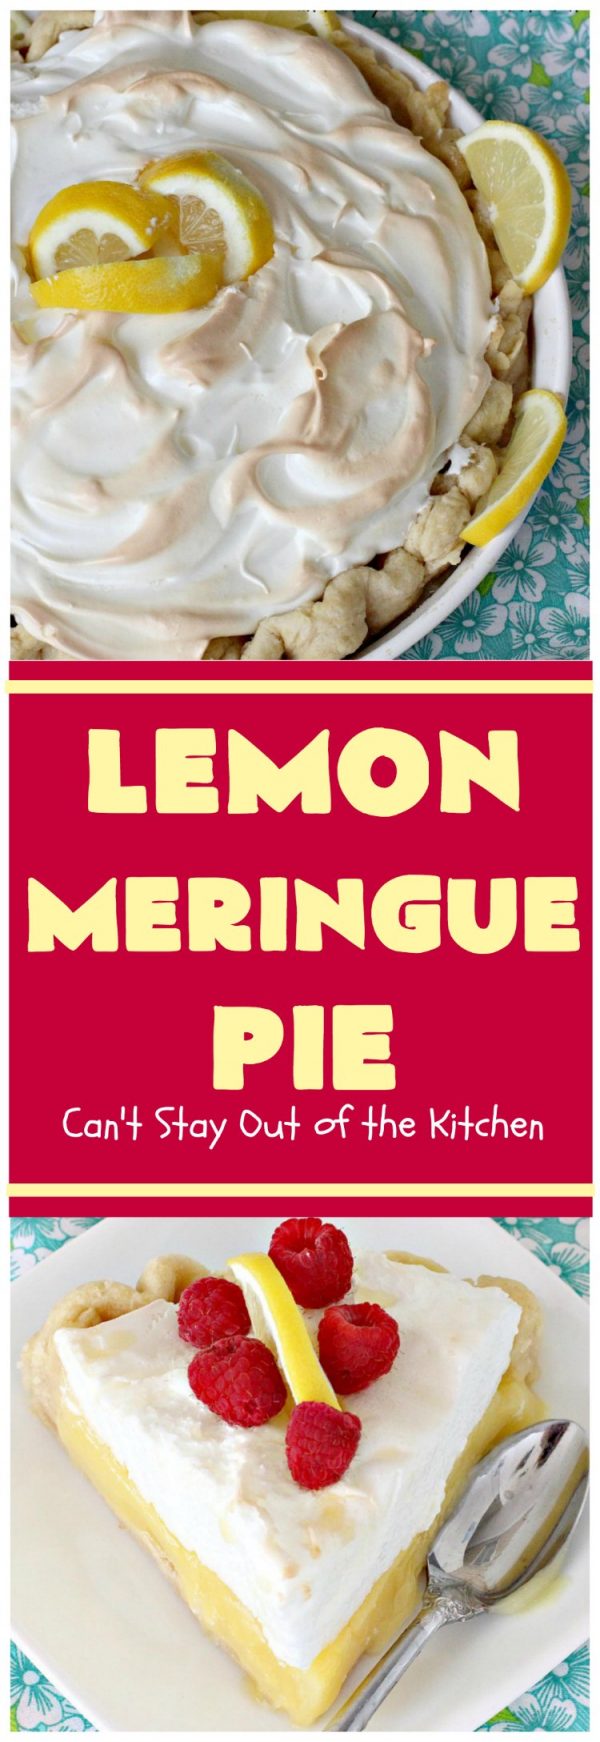 Lemon Meringue Pie – Can't Stay Out of the Kitchen